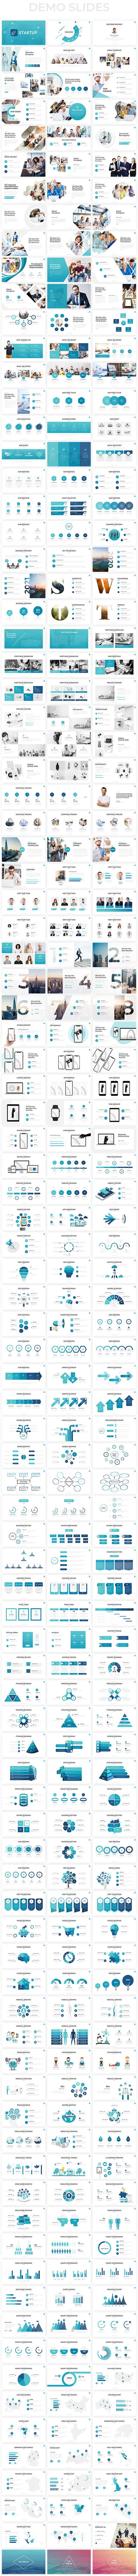 Simple & Modern Business Powerpoint Template - 1